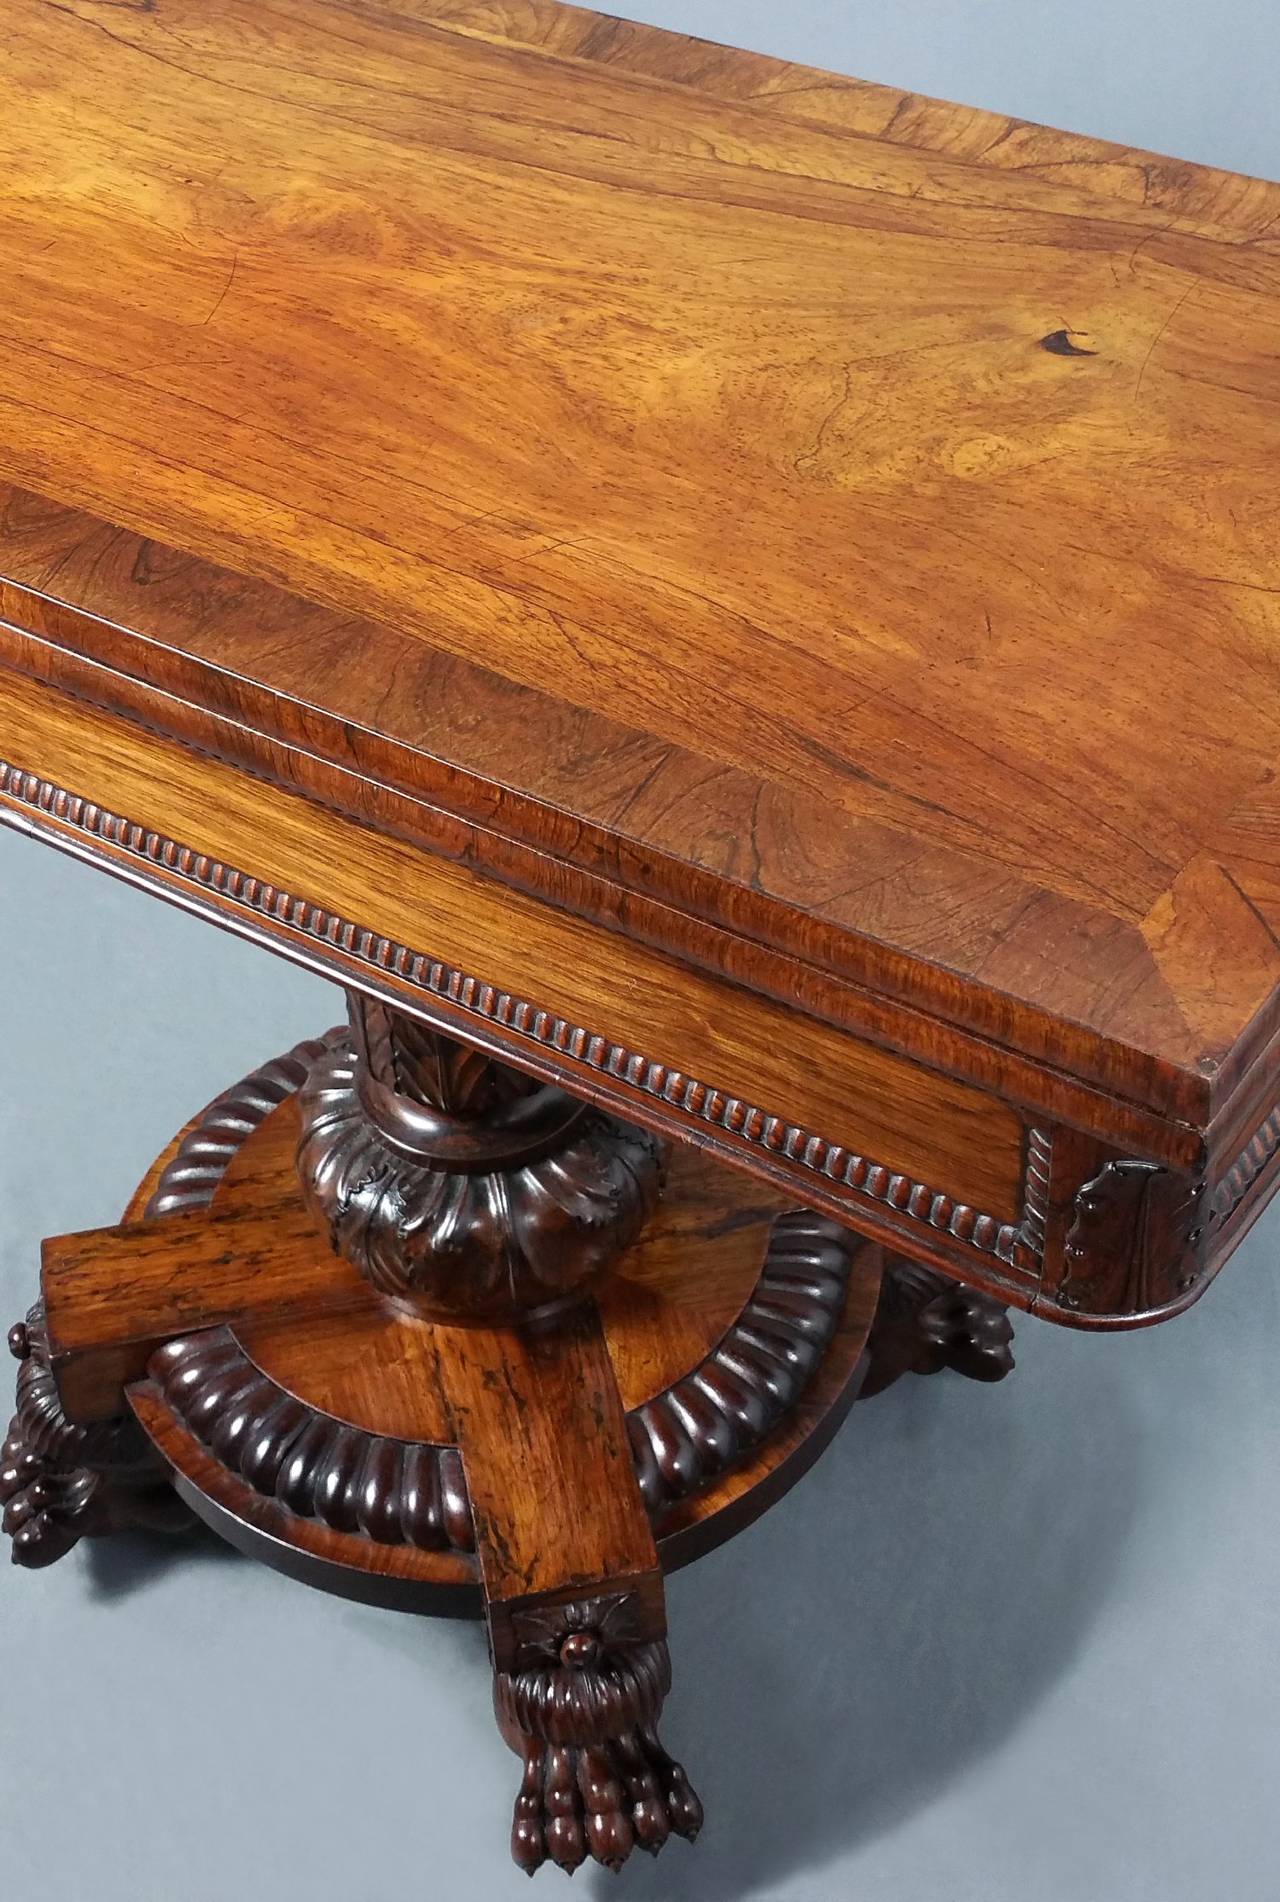 British Regency Channel Islands Rosewood Card Table